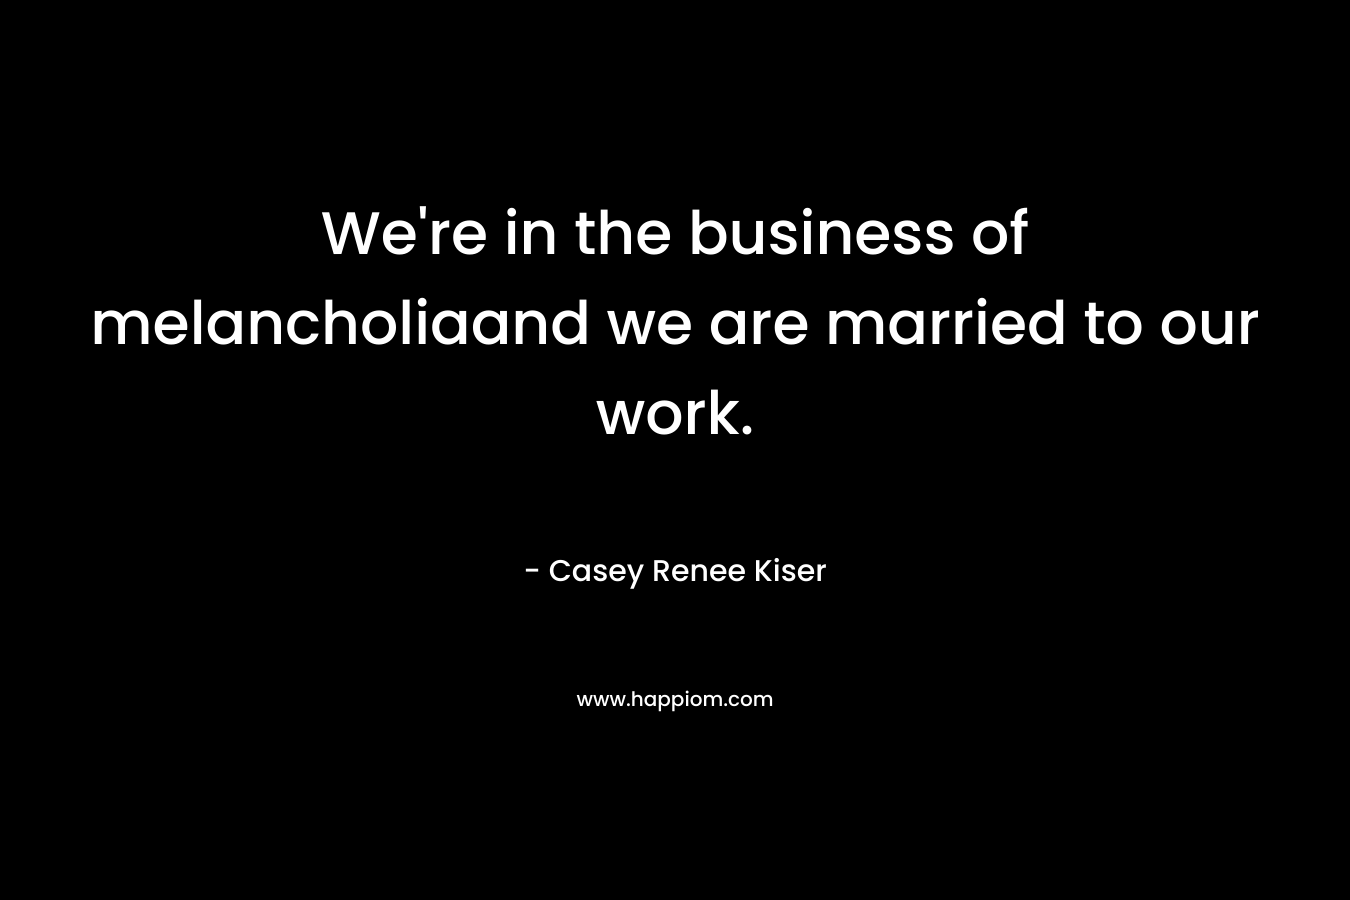 We’re in the business of melancholiaand we are married to our work. – Casey Renee Kiser